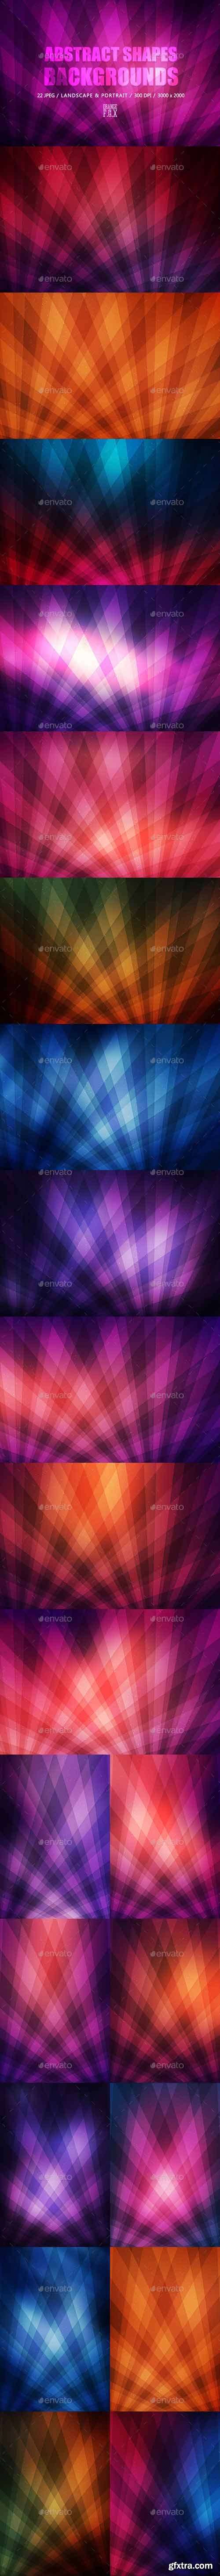 GraphicRiver - 22 Abstract Shapes Backgrounds 12120995